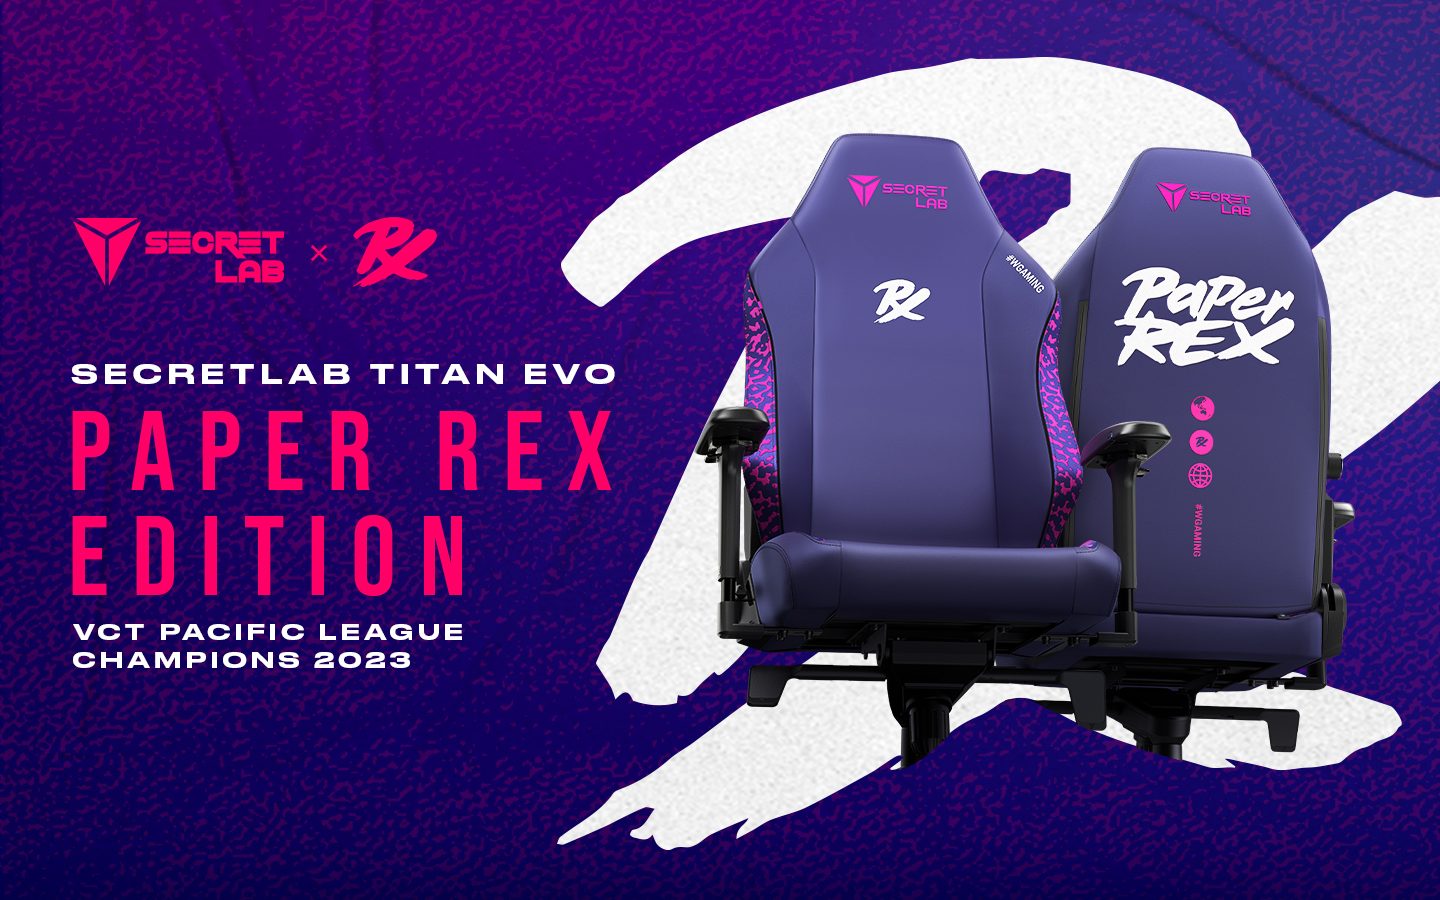 Secretlab and Paper Rex launch gaming chair